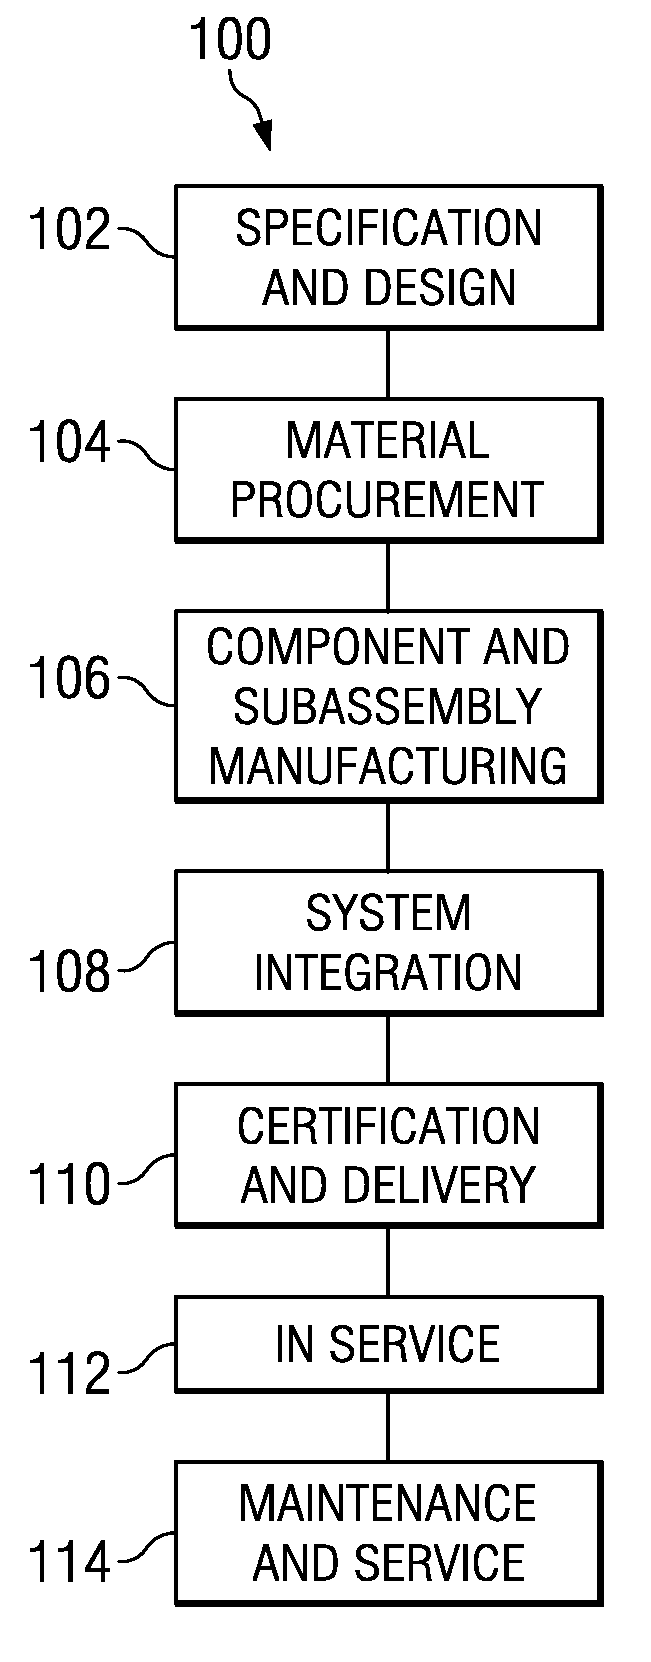 Optimizing usage of powered systems